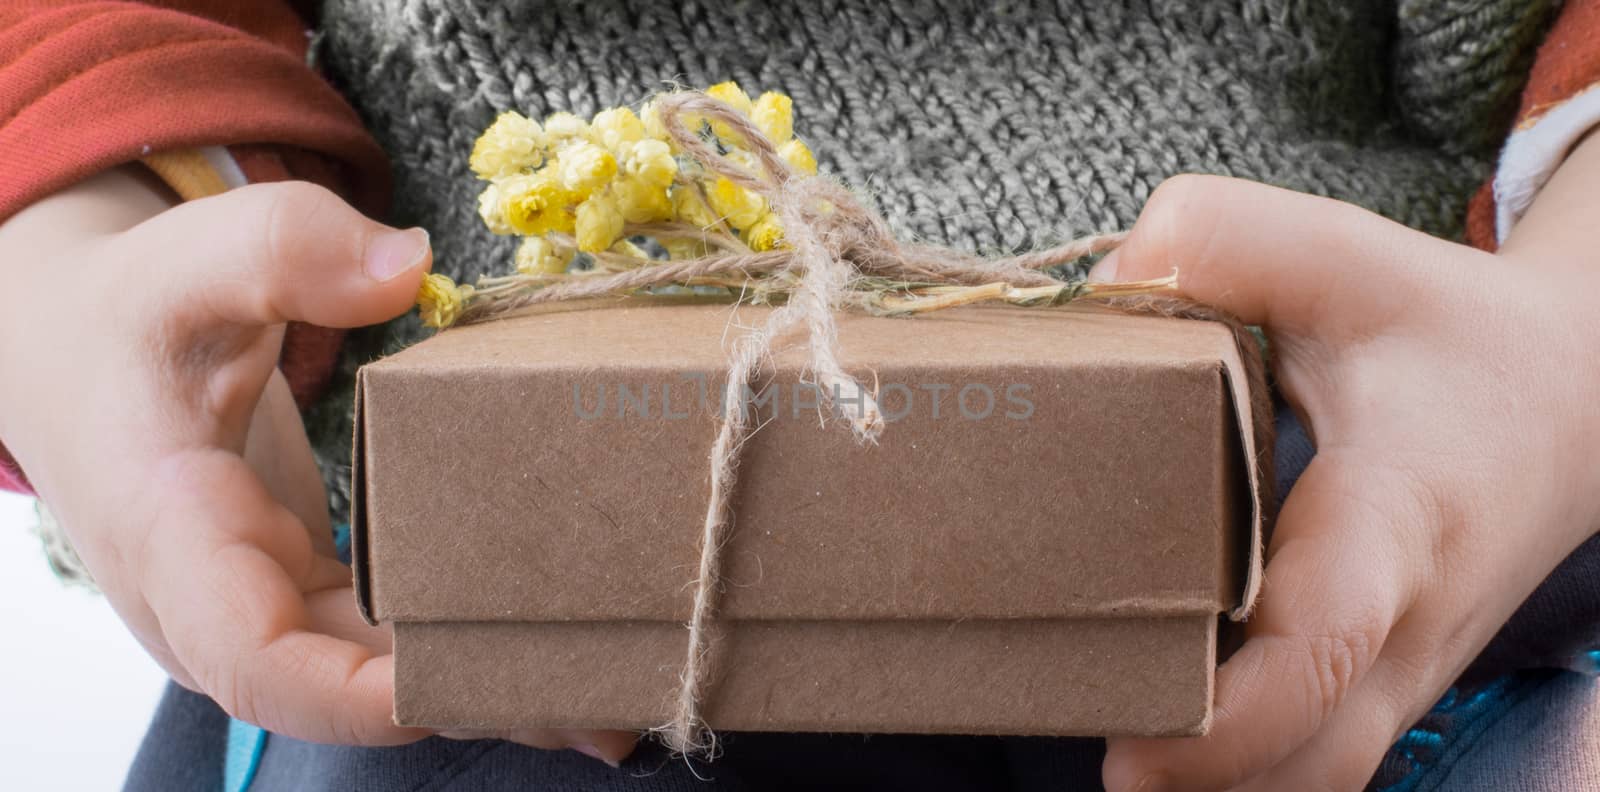 Baby holding a wrapped gift box with yellow flower on white background